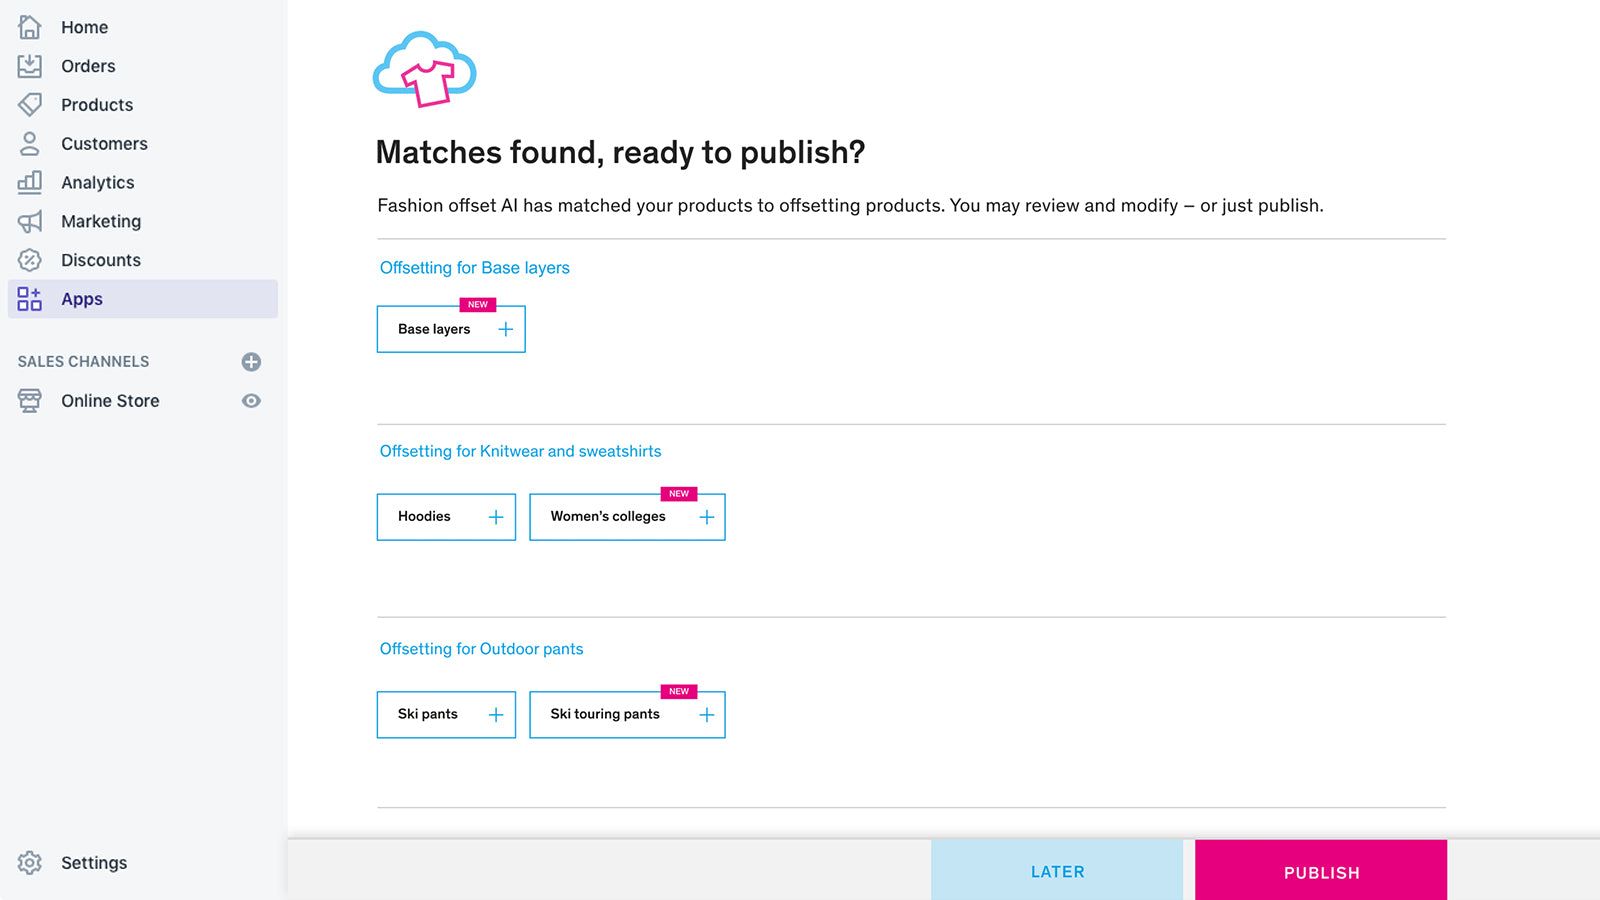 Automatic AI matching of your products with offsetting products